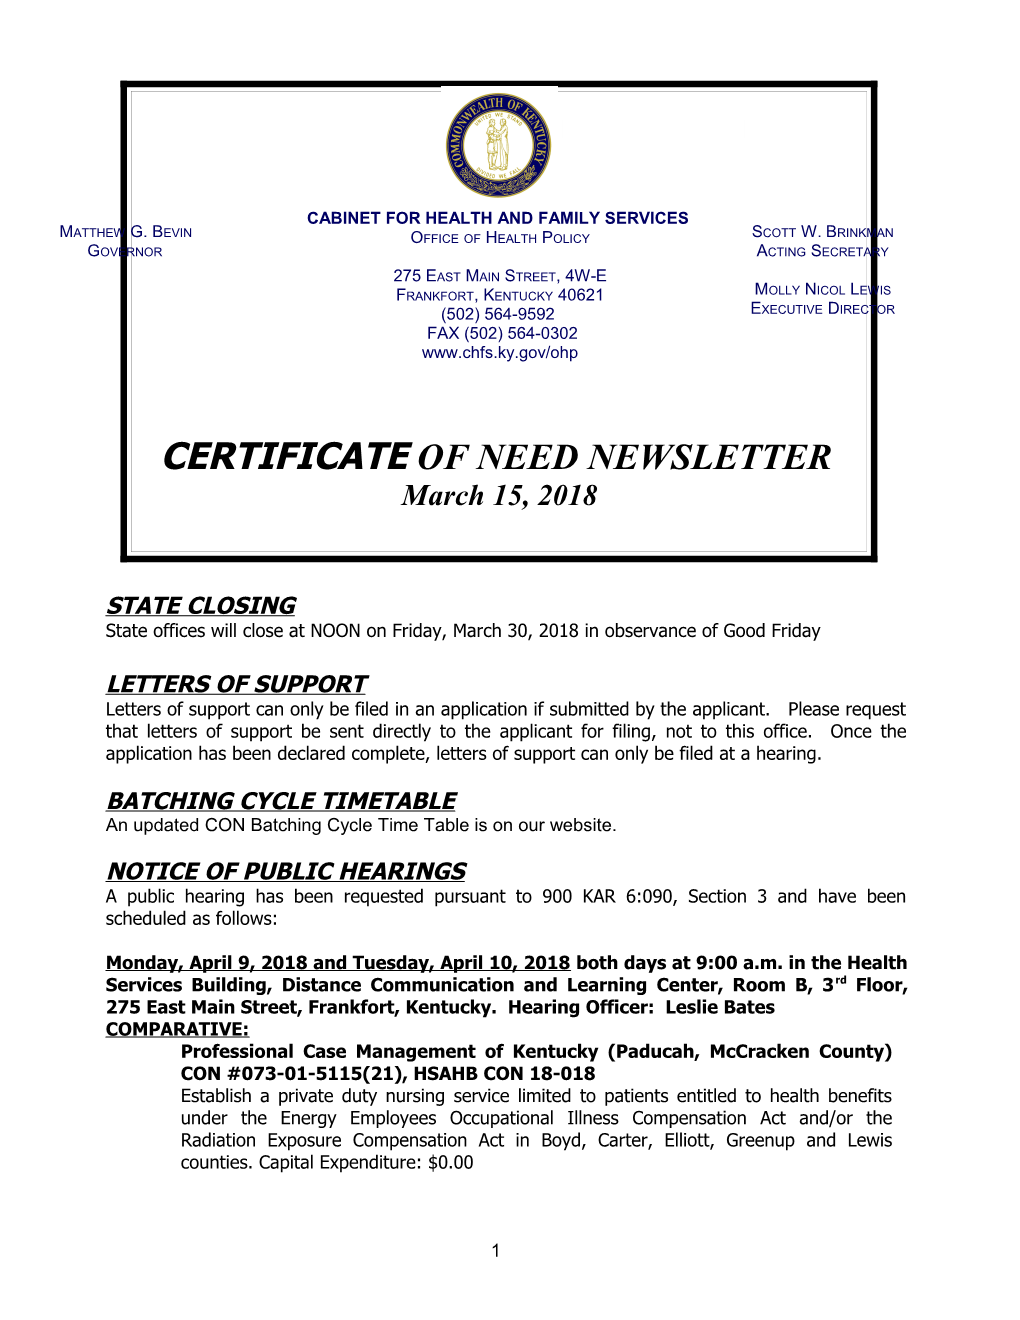 Certificate of Need Newsletter, March 2018